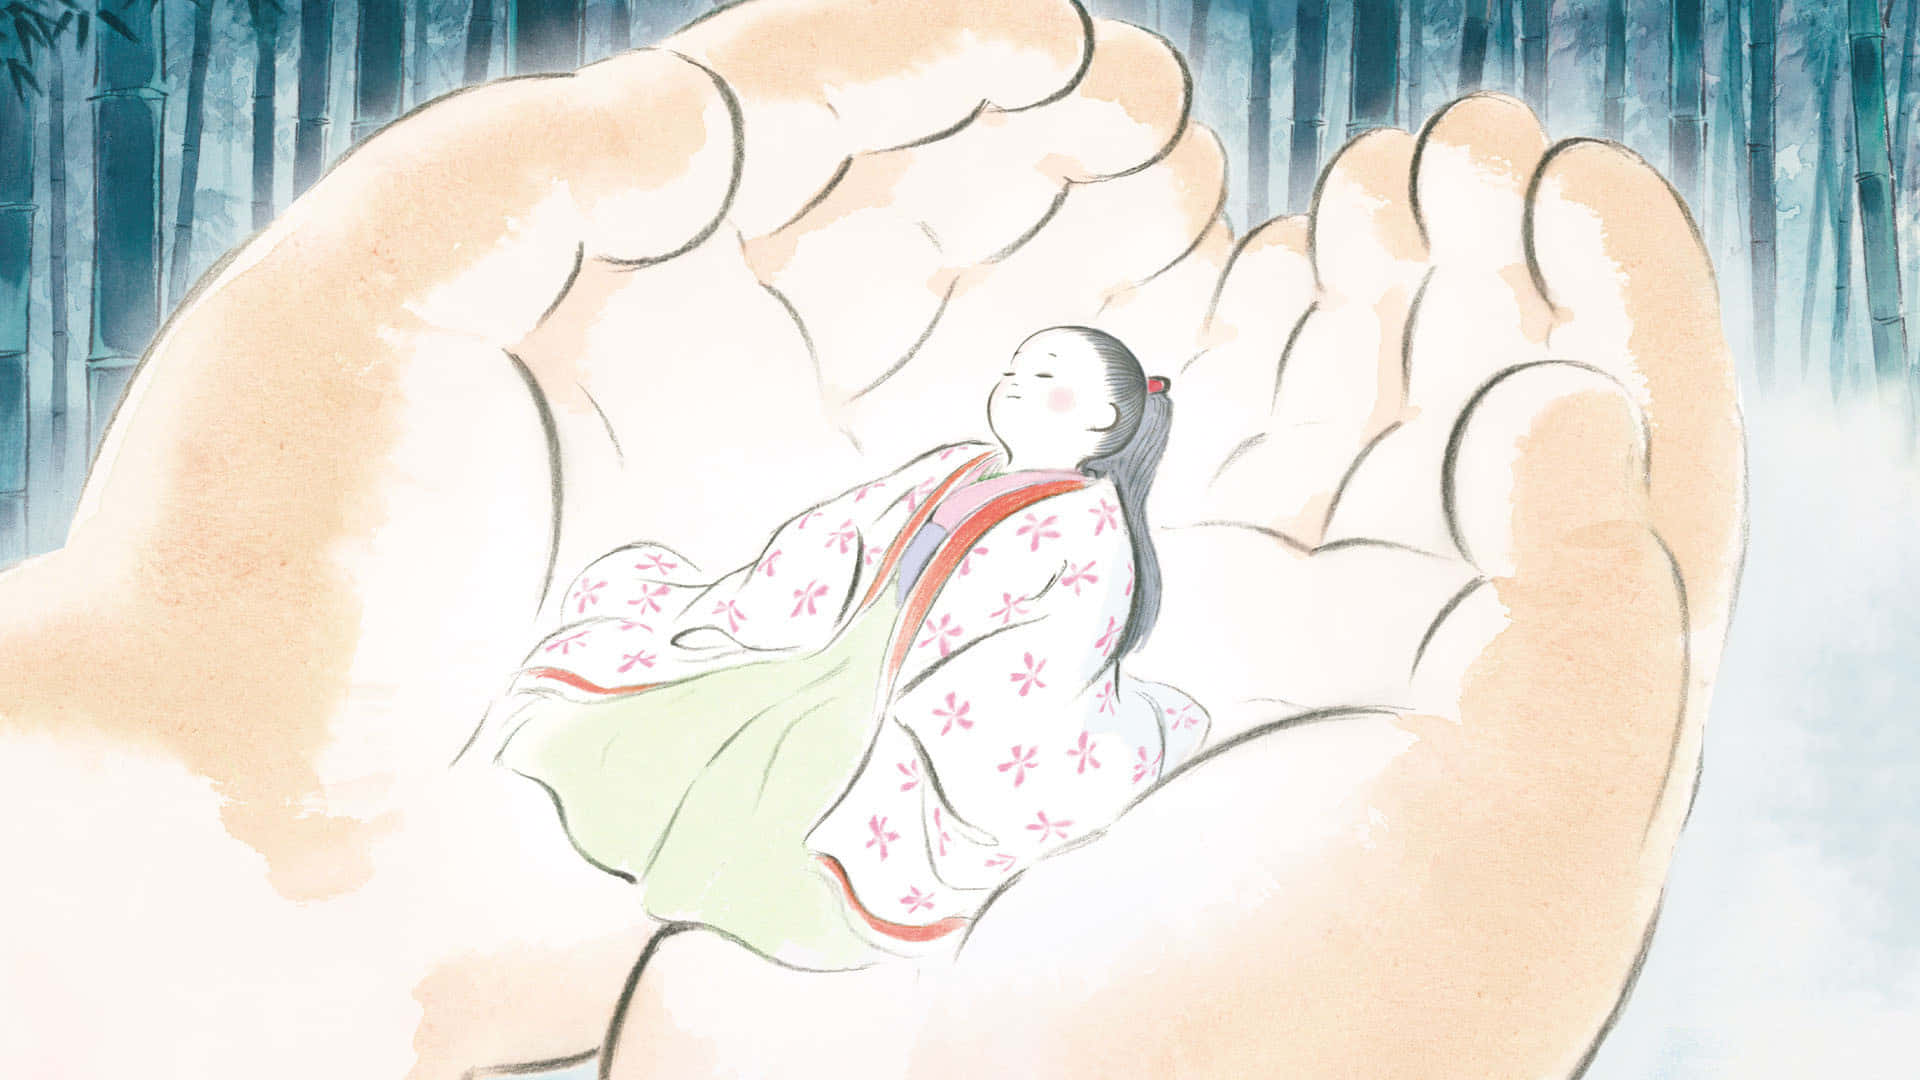 The Tale of the Princess Kaguya in a whimsical scene Wallpaper